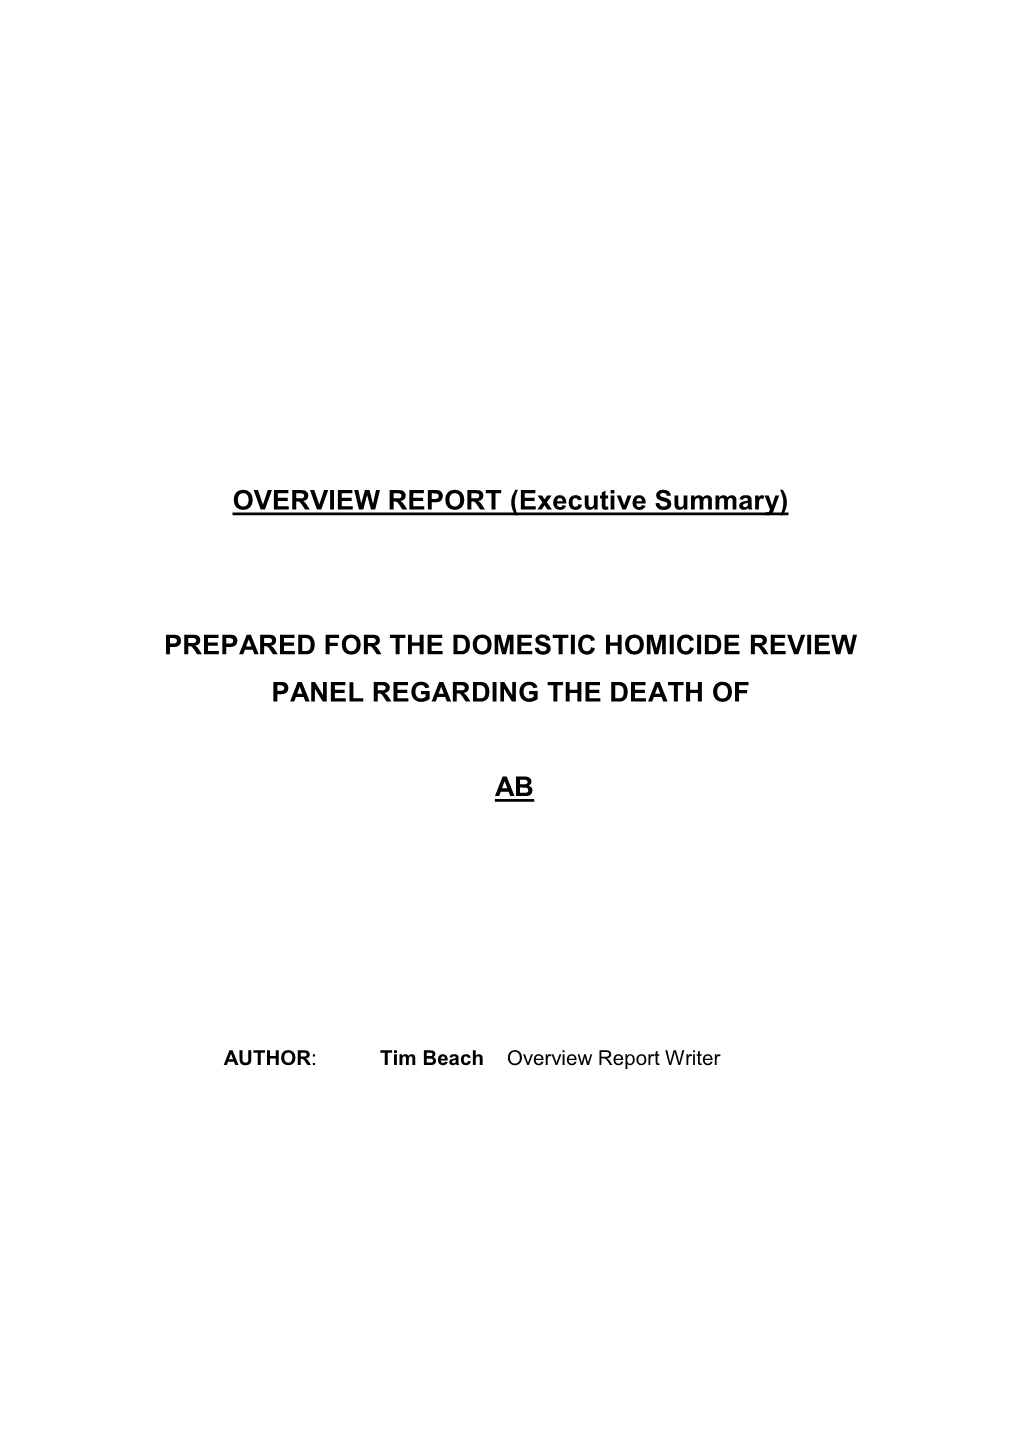 Exec Summary of DHR Review Panel Into the Death Of